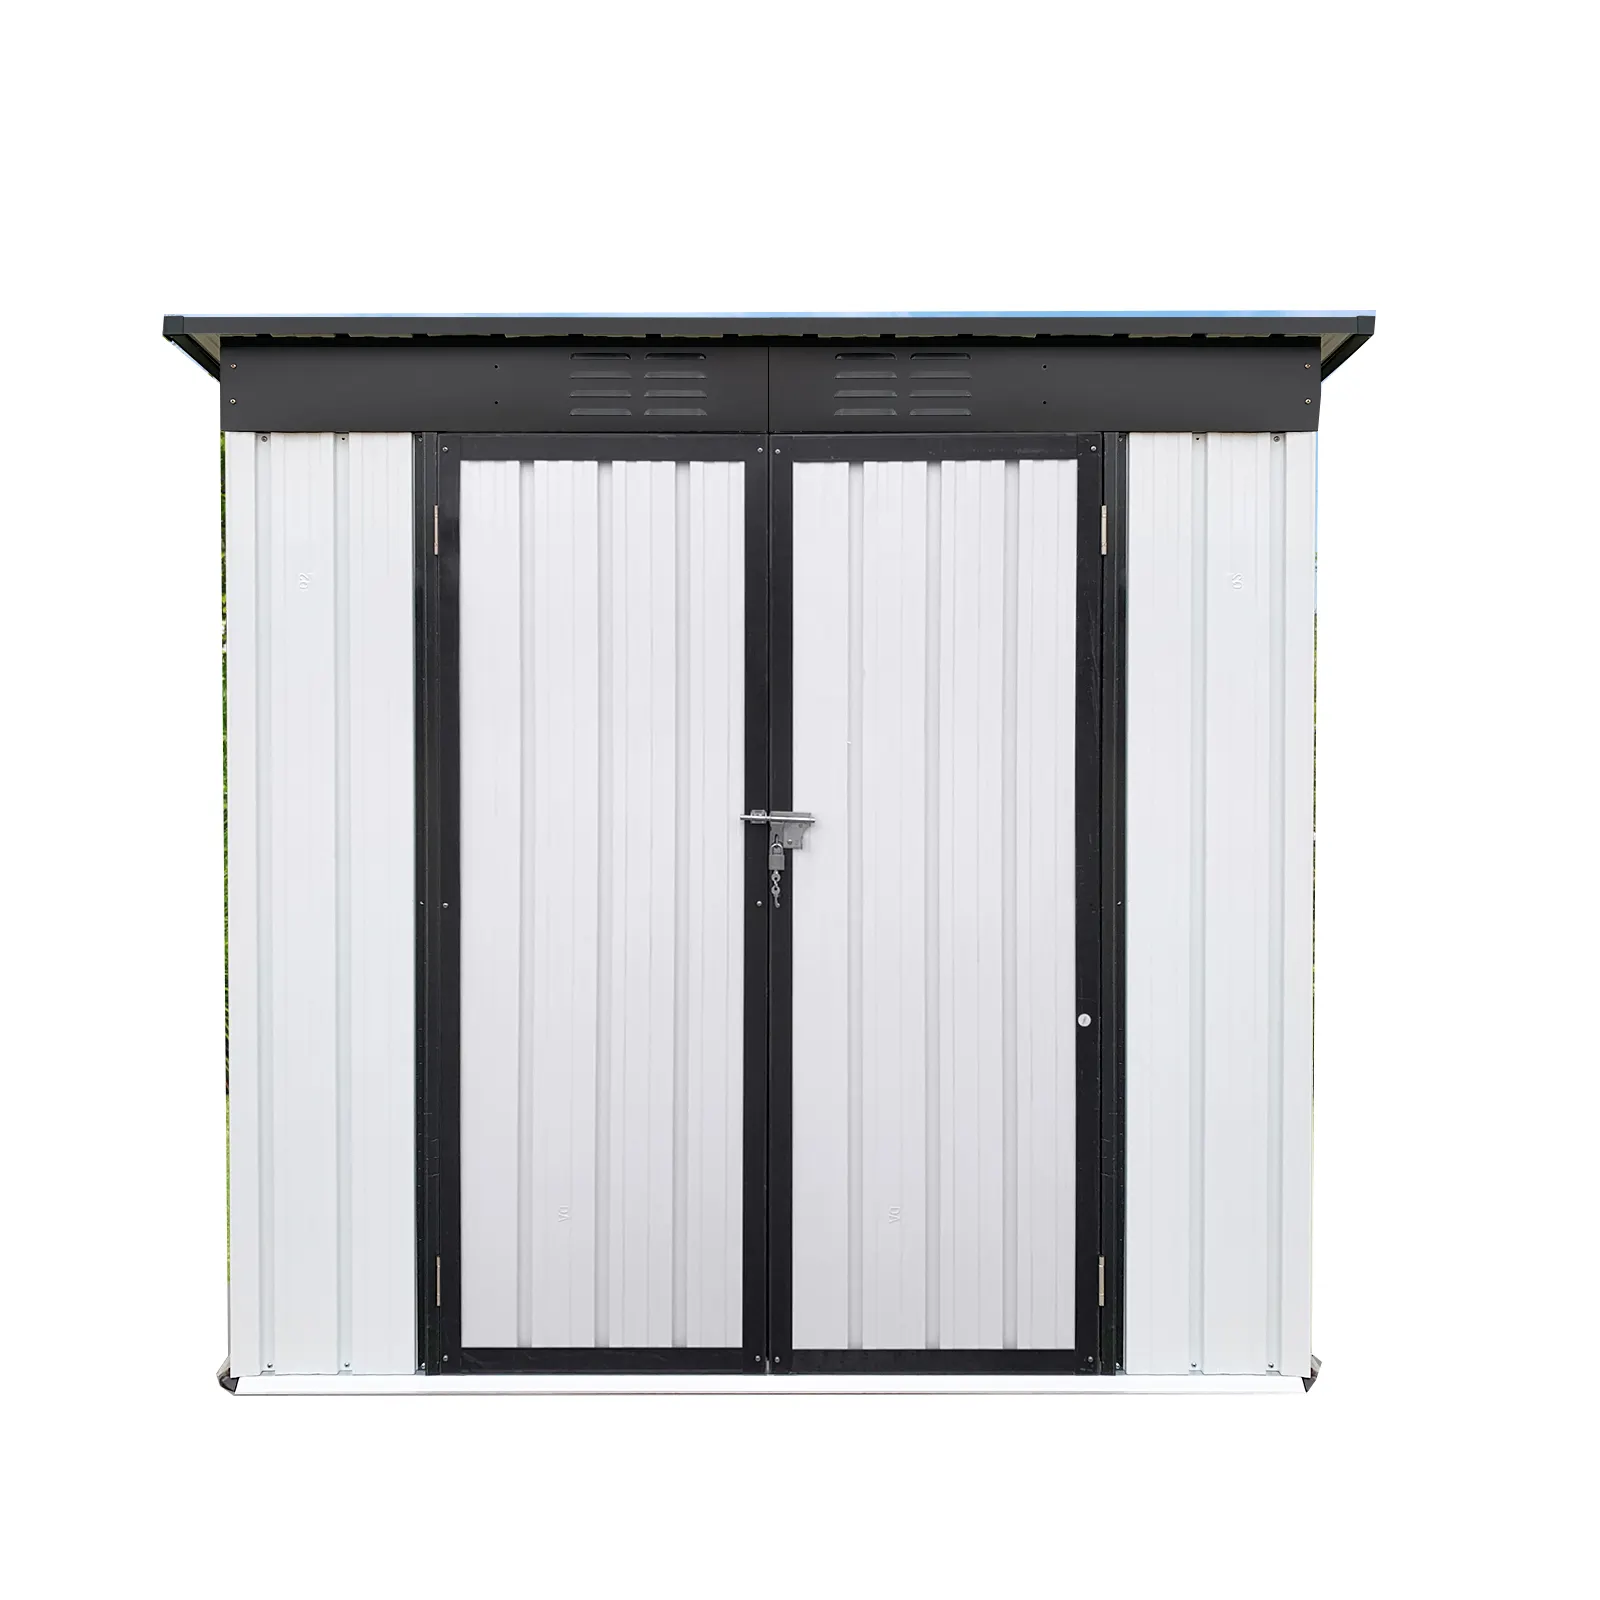 4*6 White + Black Tool House Garden Shed Metal Storage Room Garage Container Steel Shed